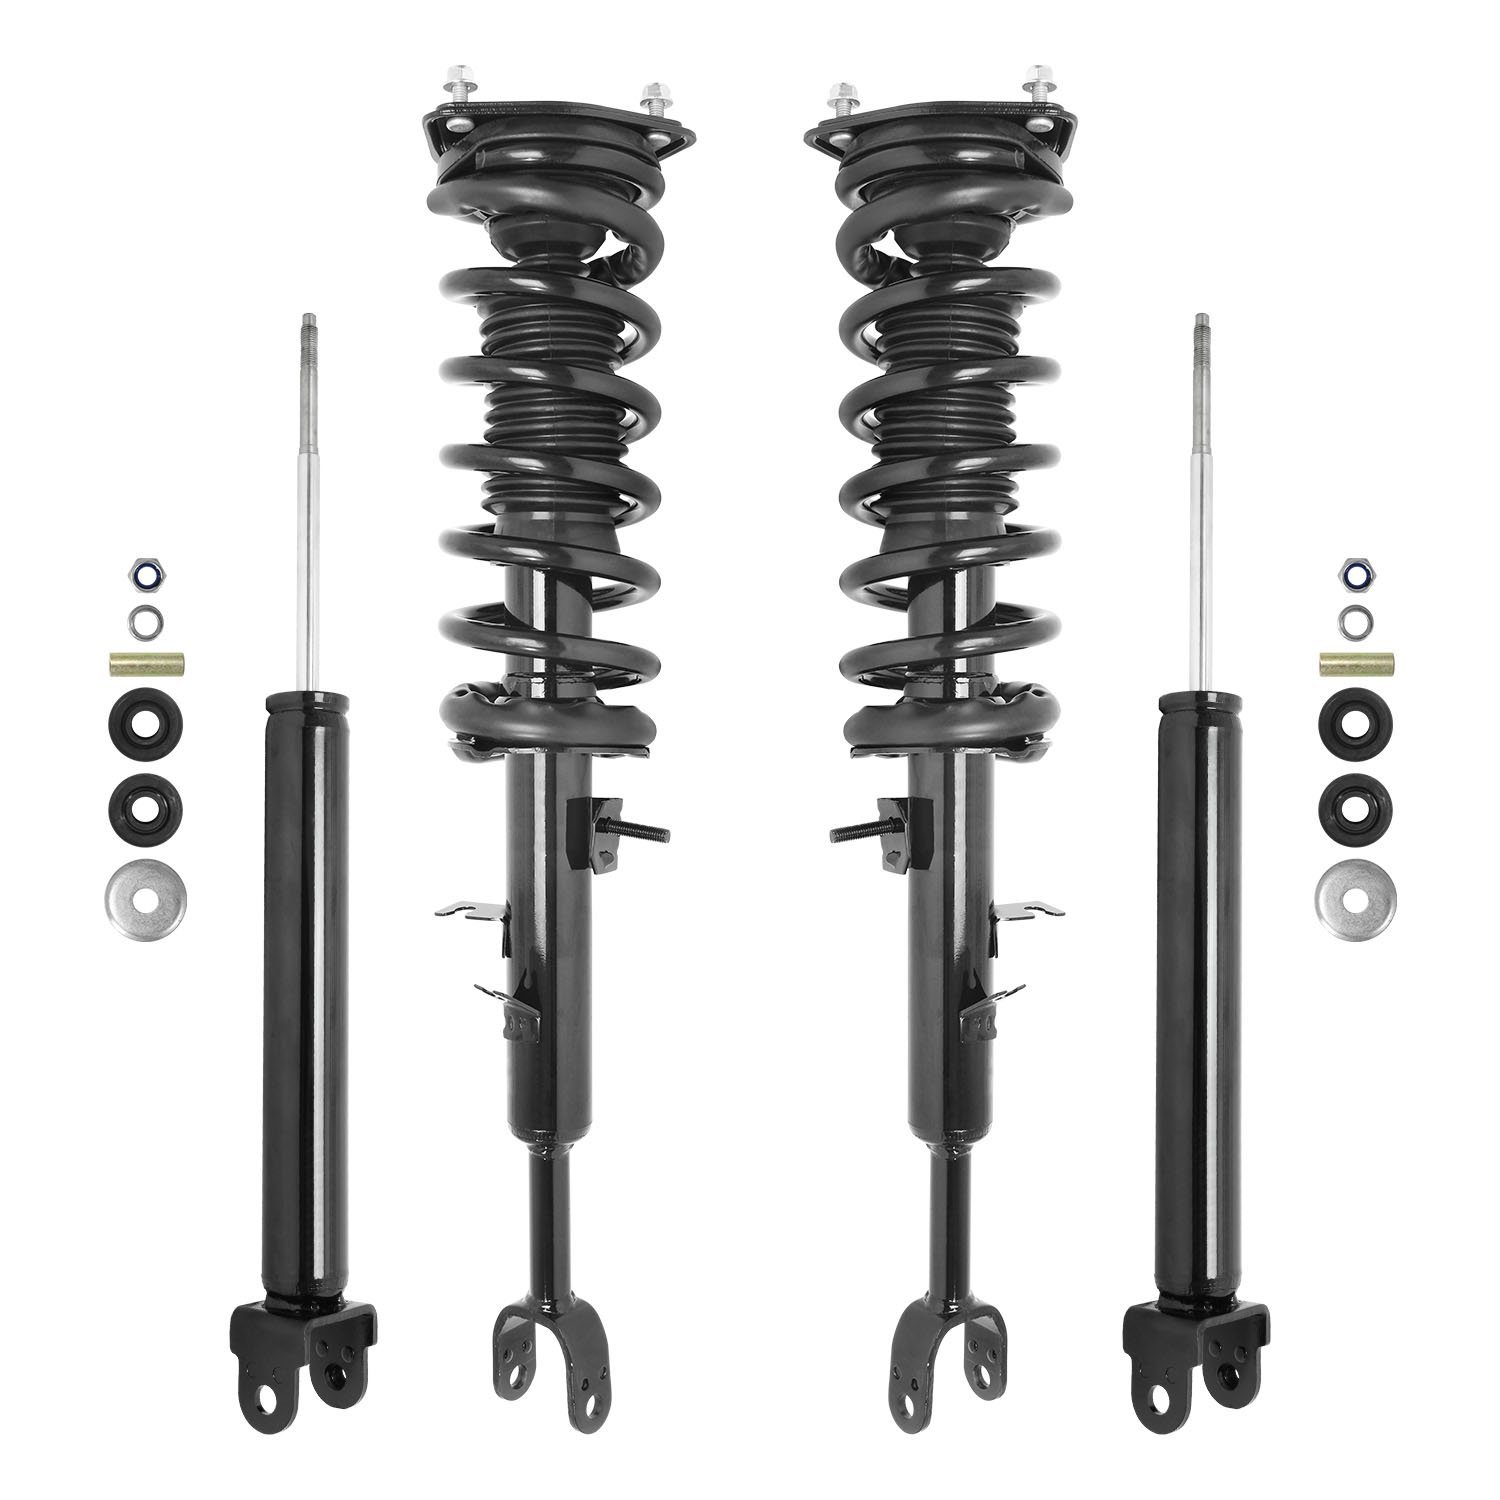 4-11397-255110-001 Front & Rear Suspension Strut & Coil Spring Assembly Fits Select Infiniti G35